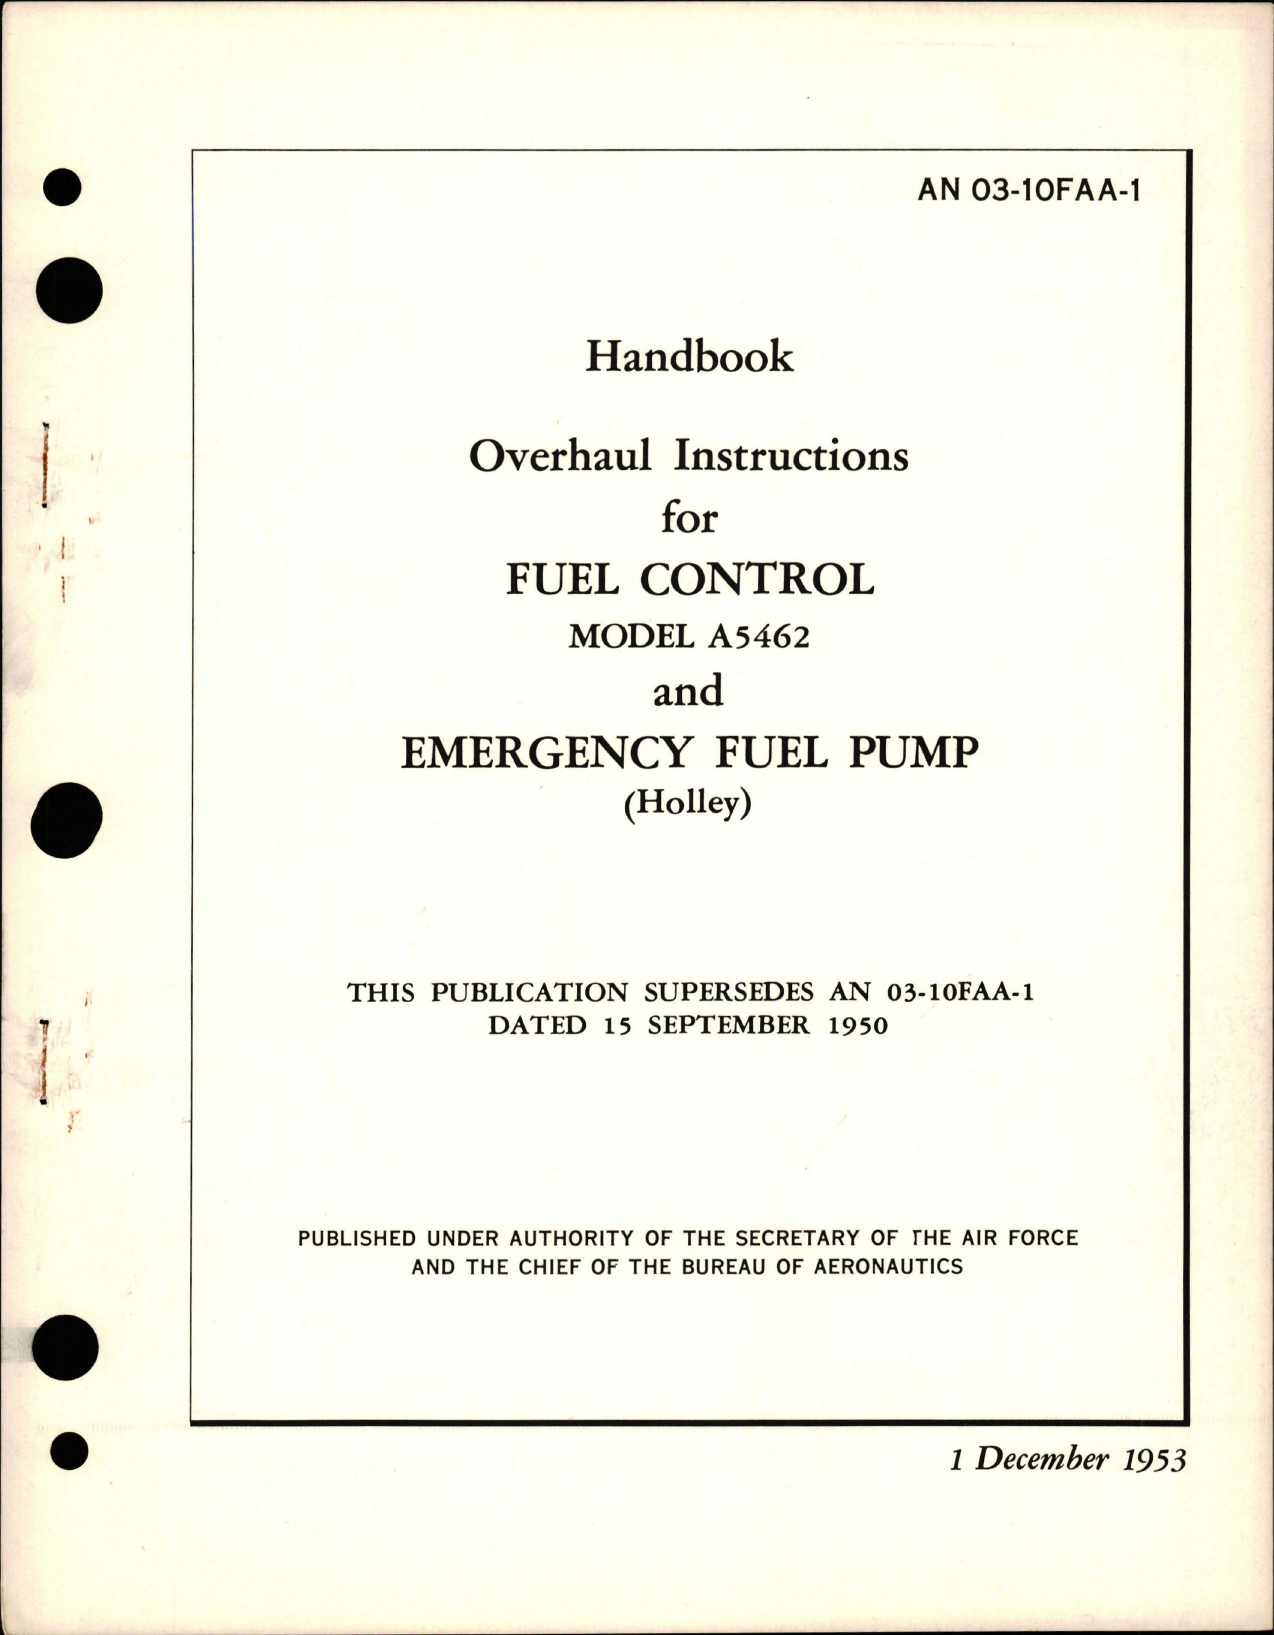 Sample page 1 from AirCorps Library document: Overhaul Instructions for Fuel Control - Model A5462, and Emergency Fuel Pump